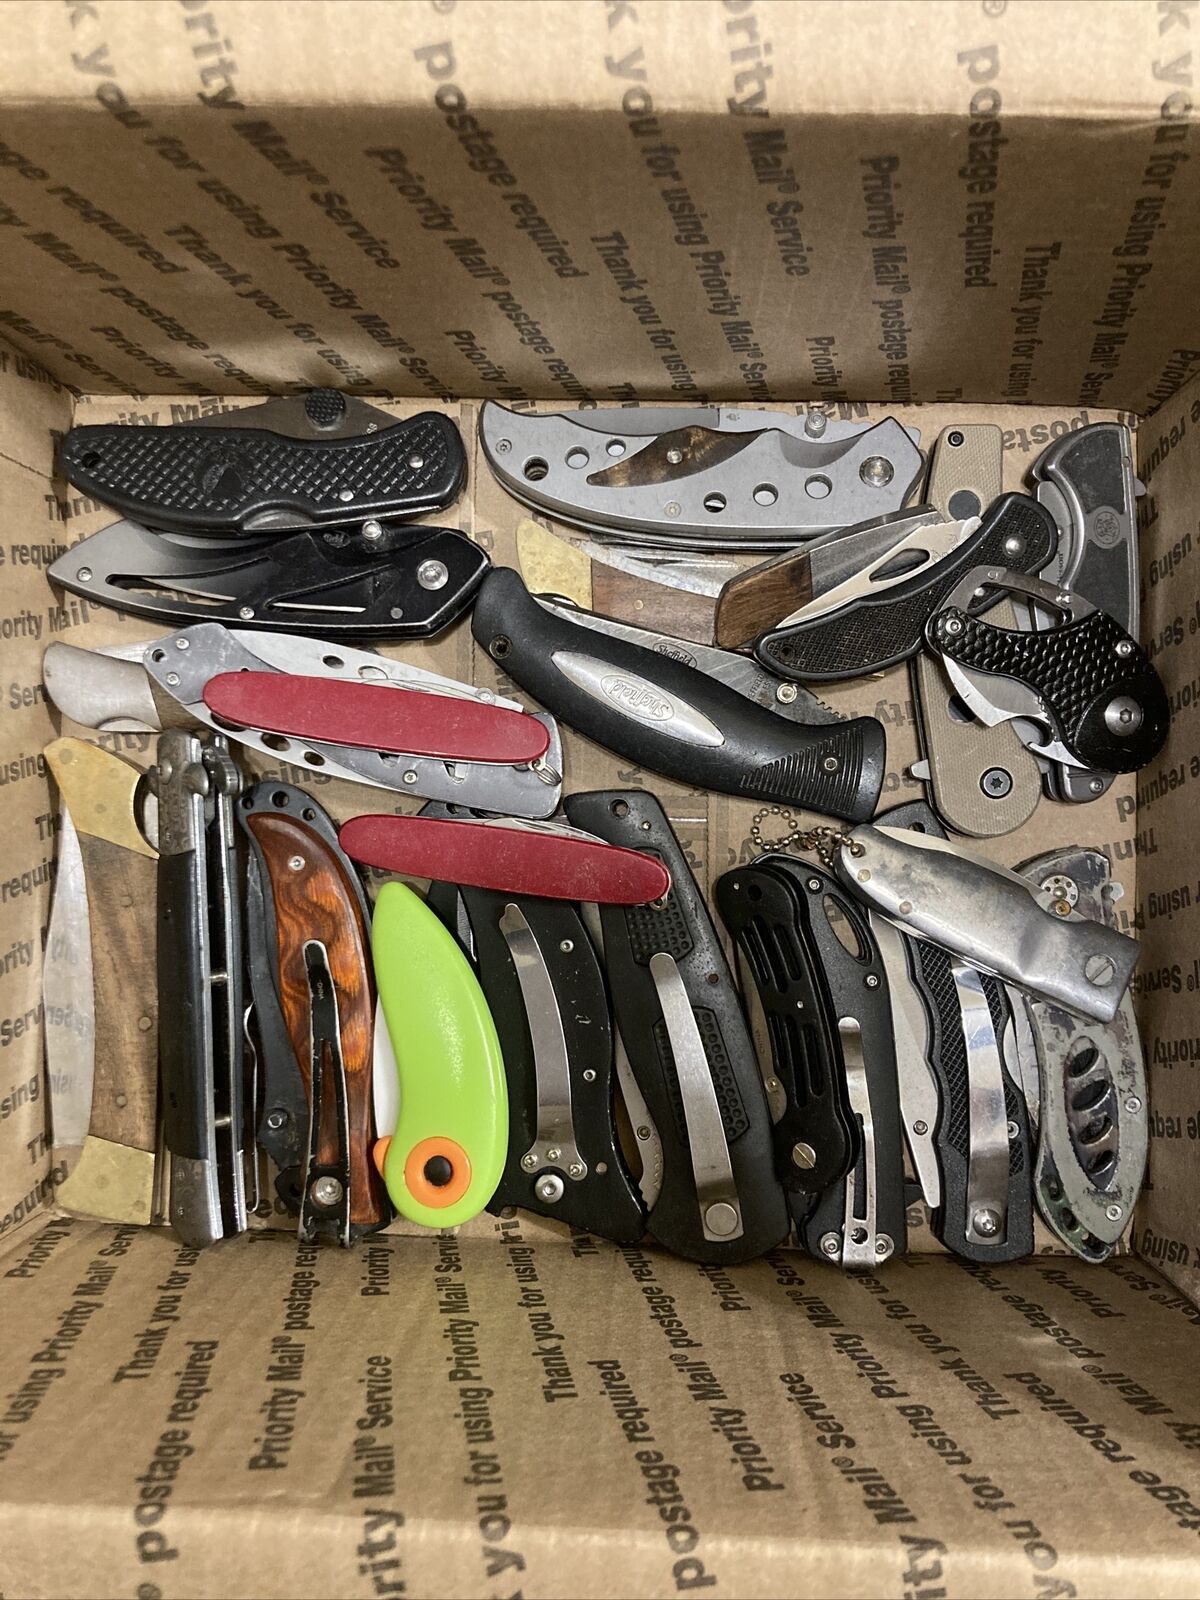 25 TSA Confiscated KNIVES Mix. Tactical/Pocket/Folding/Small. IT'S A STEEL